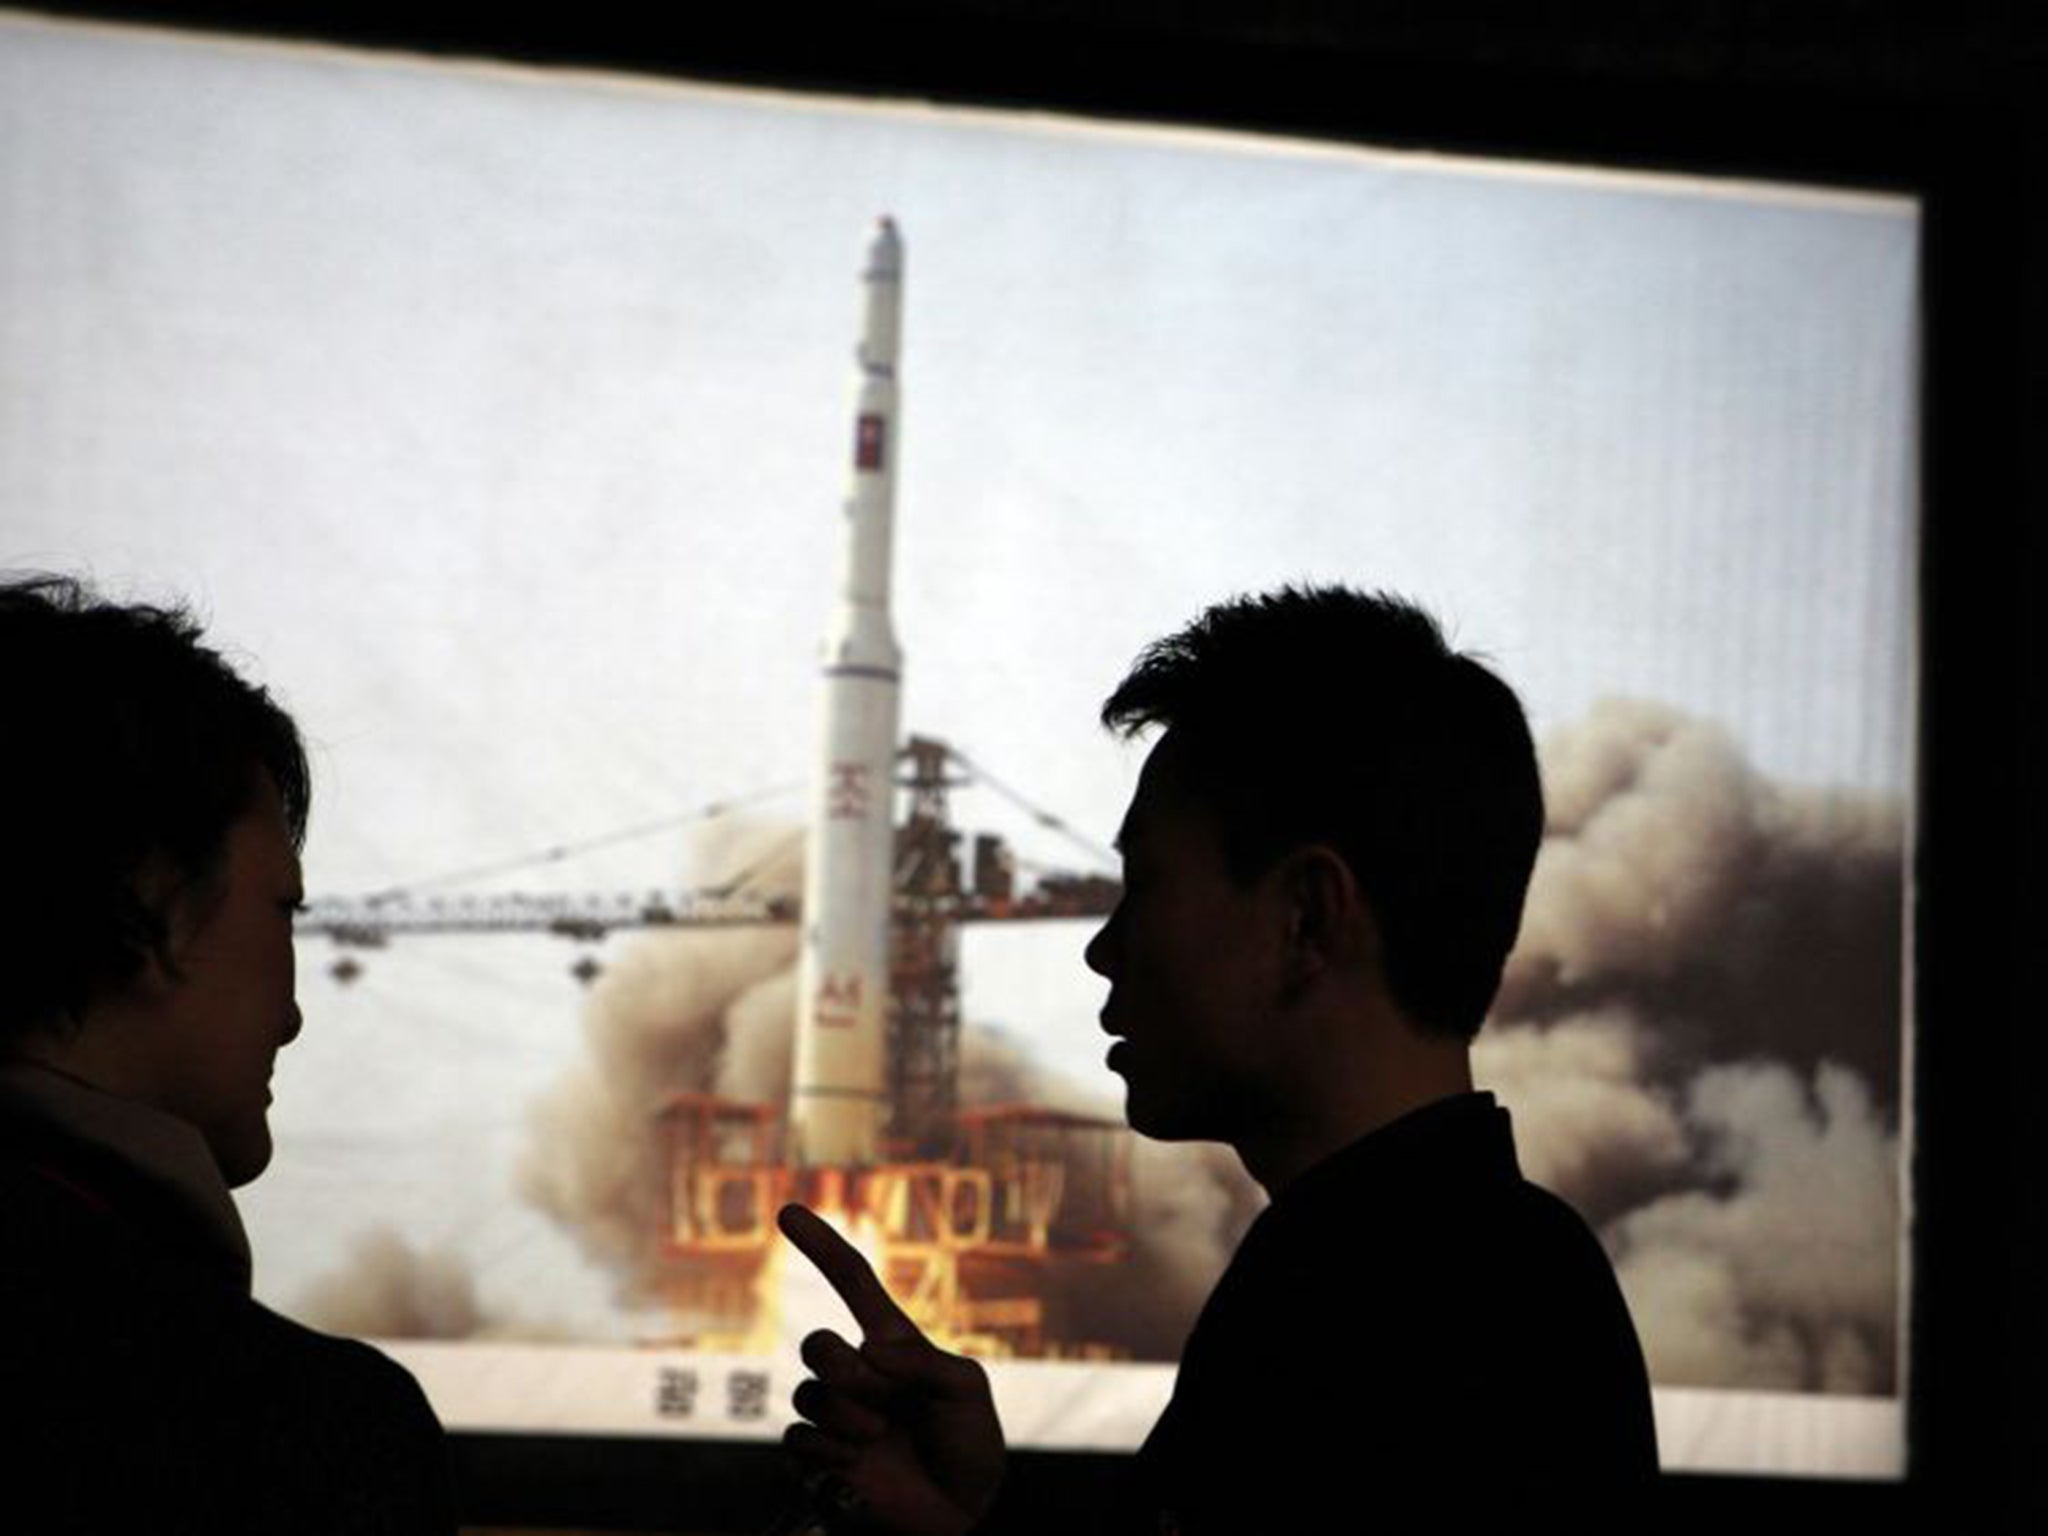 A 2012 exhibition in Pyongyang shows the Bright Star satellite launch